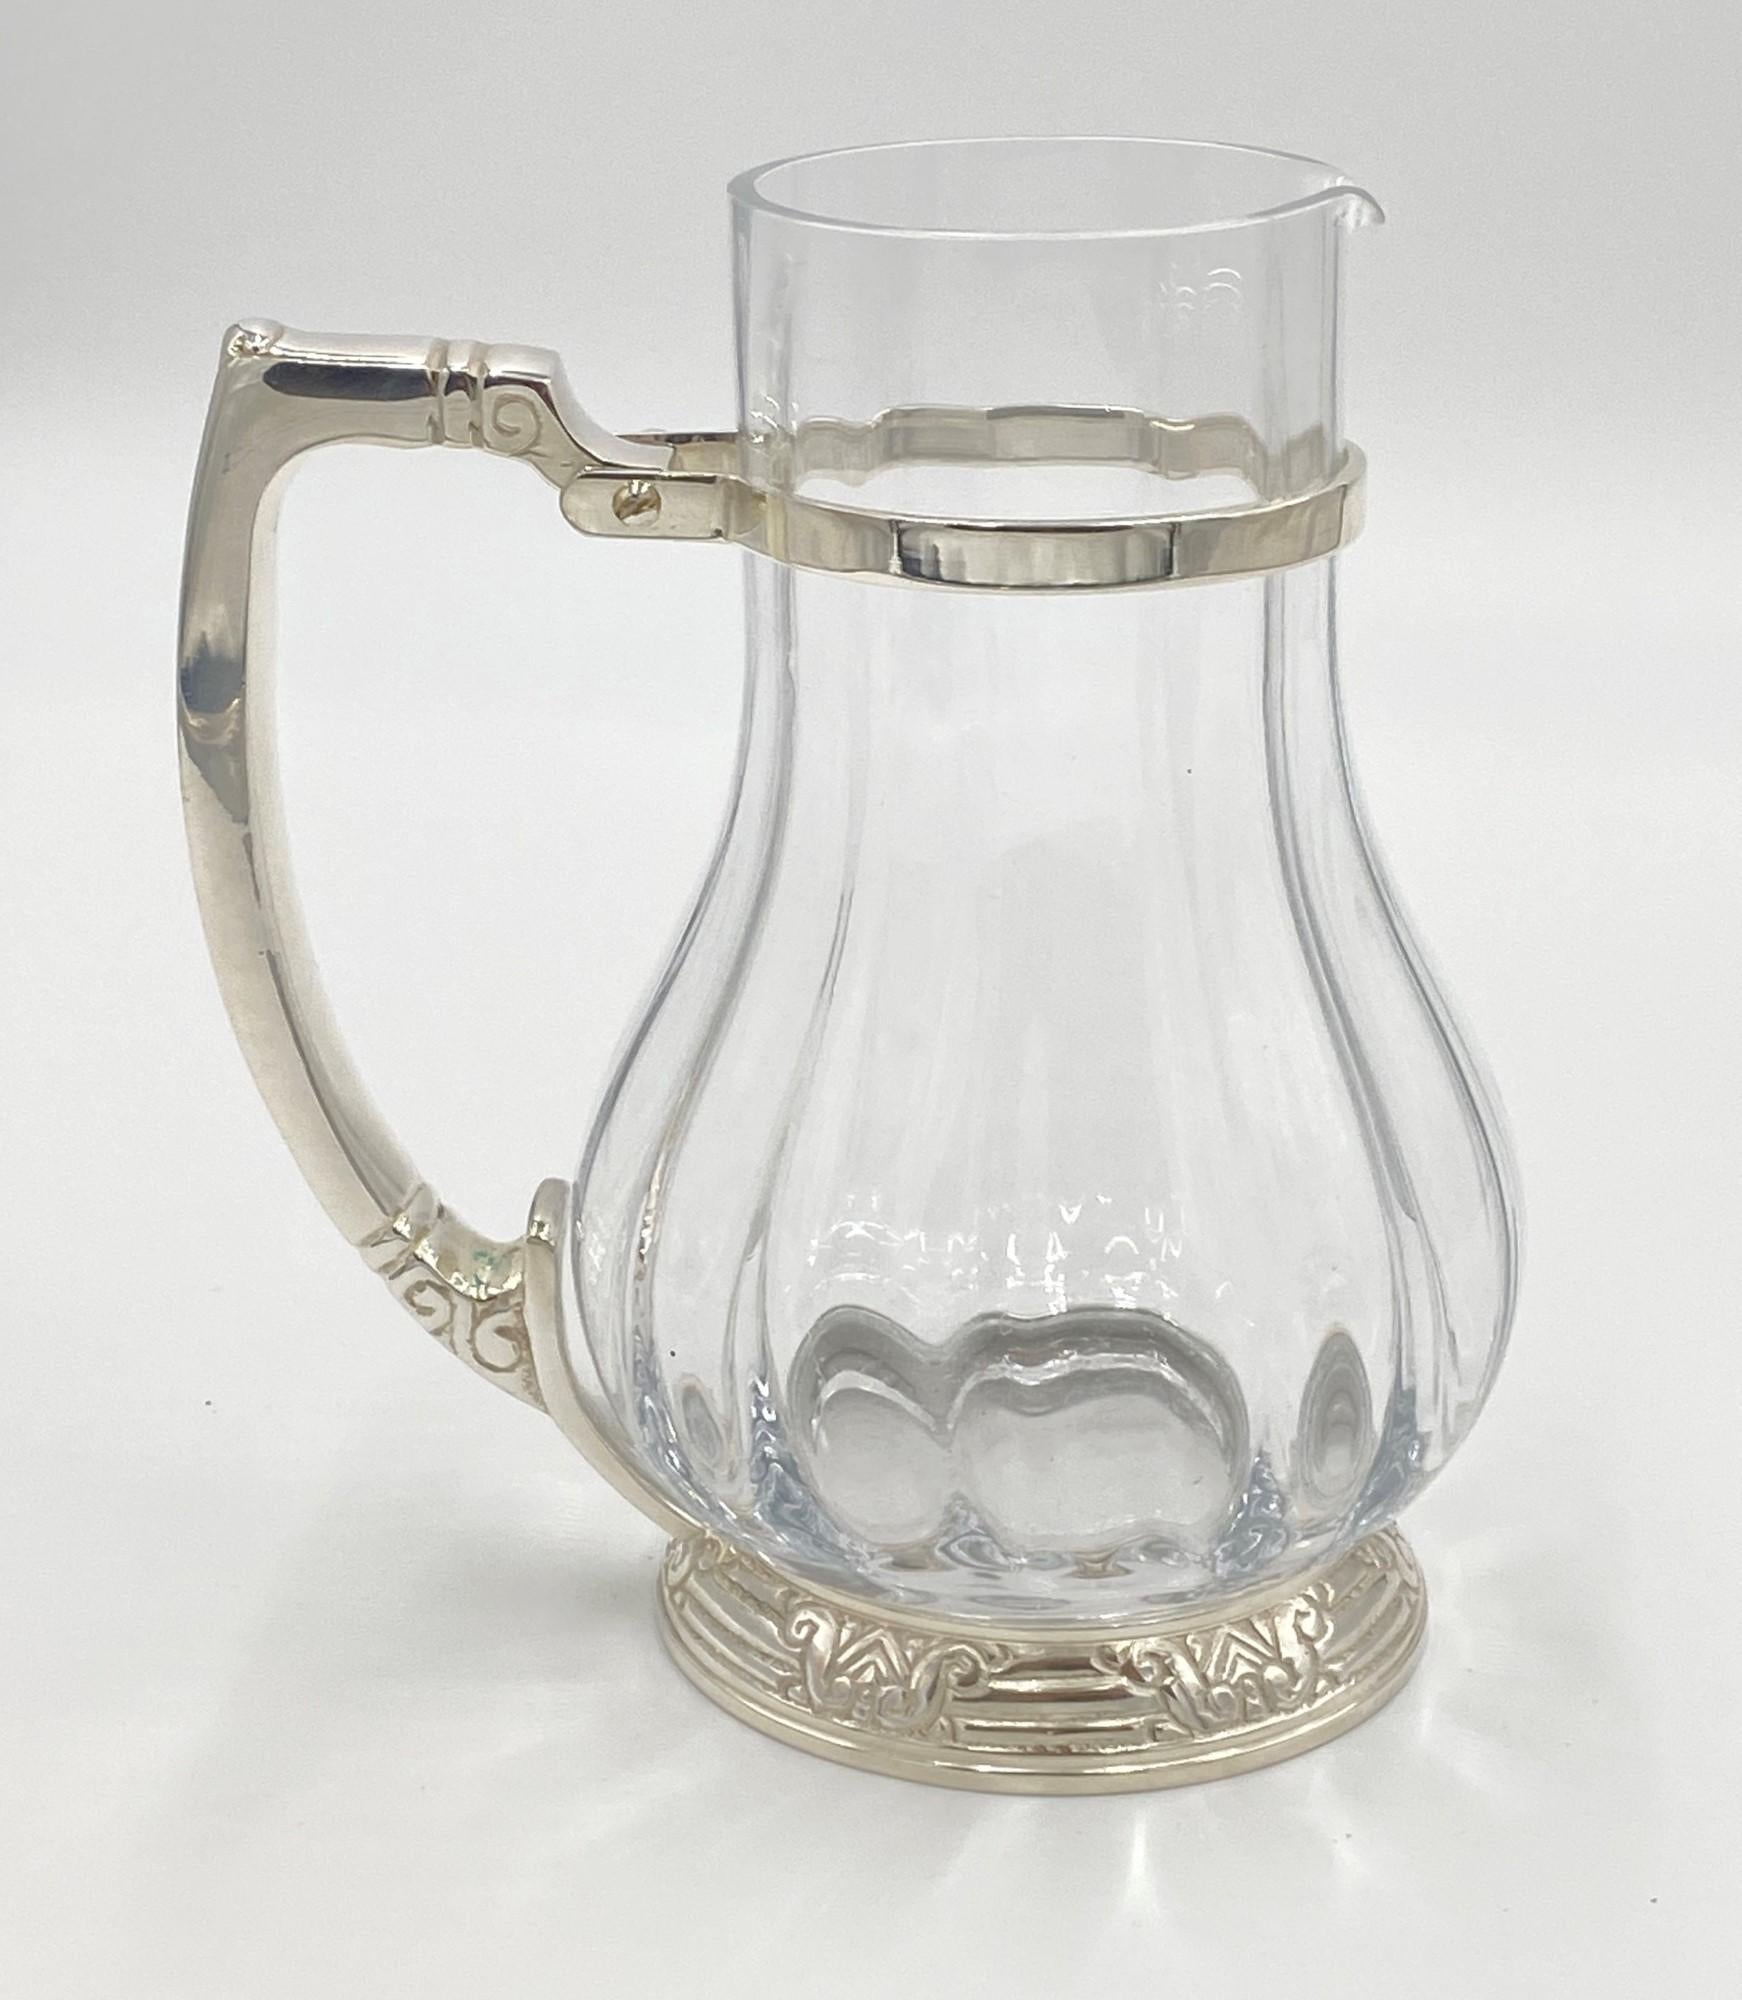 Silvered NYC Waldorf Astoria Hotel Silver Plated Water Pitcher Art Deco Style